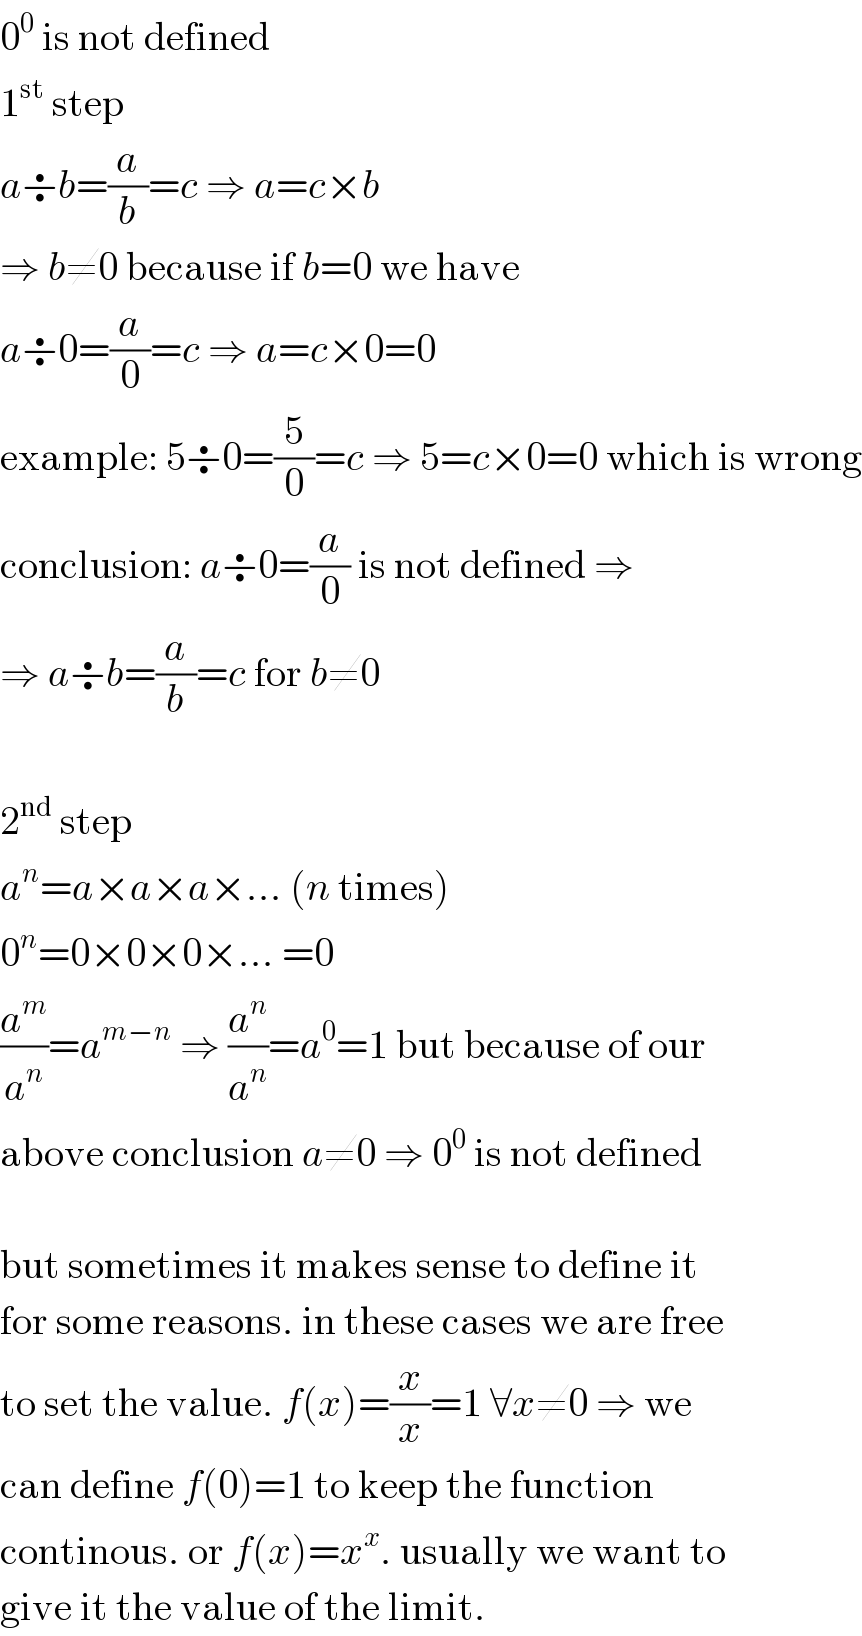 0^0  is not defined  1^(st)  step  a÷b=(a/b)=c ⇒ a=c×b  ⇒ b≠0 because if b=0 we have  a÷0=(a/0)=c ⇒ a=c×0=0  example: 5÷0=(5/0)=c ⇒ 5=c×0=0 which is wrong  conclusion: a÷0=(a/0) is not defined ⇒  ⇒ a÷b=(a/b)=c for b≠0    2^(nd)  step  a^n =a×a×a×... (n times)  0^n =0×0×0×... =0  (a^m /a^n )=a^(m−n)  ⇒ (a^n /a^n )=a^0 =1 but because of our  above conclusion a≠0 ⇒ 0^0  is not defined    but sometimes it makes sense to define it  for some reasons. in these cases we are free  to set the value. f(x)=(x/x)=1 ∀x≠0 ⇒ we  can define f(0)=1 to keep the function  continous. or f(x)=x^x . usually we want to  give it the value of the limit.  